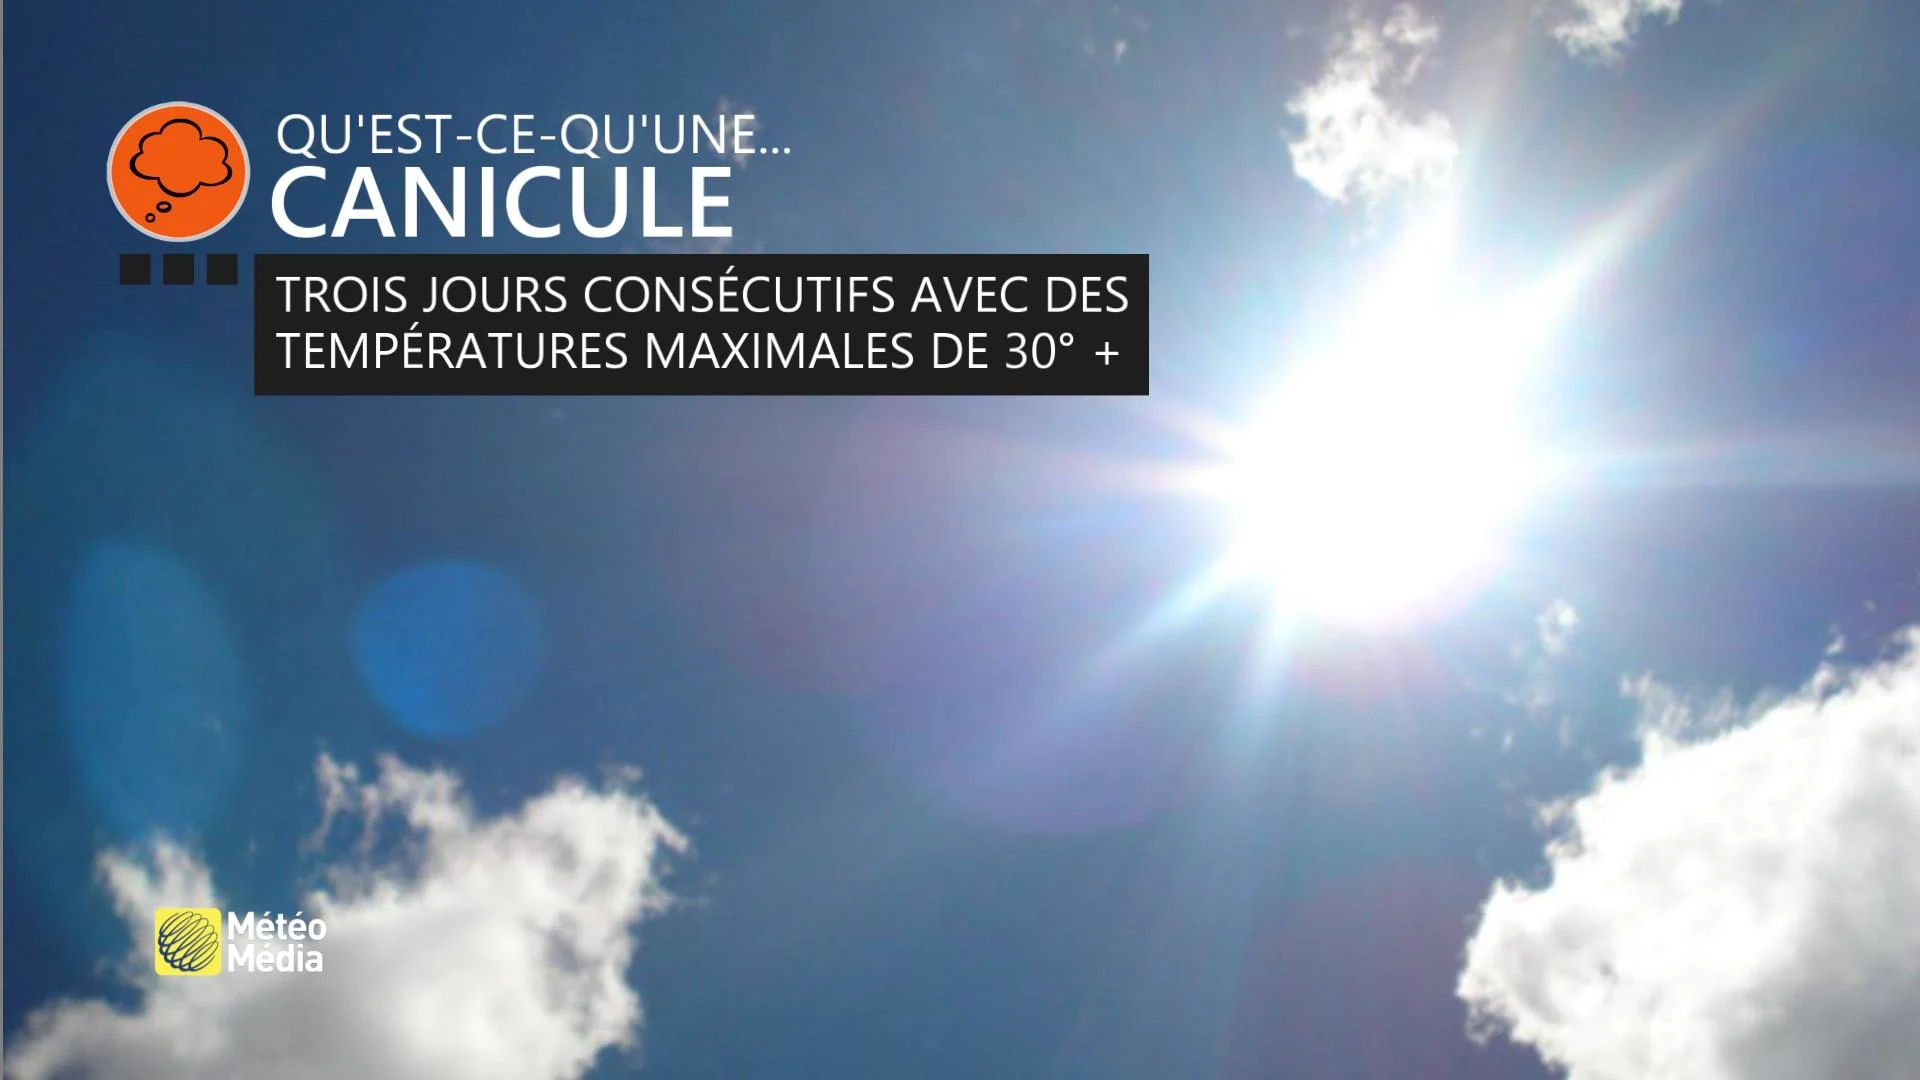 canicule definition